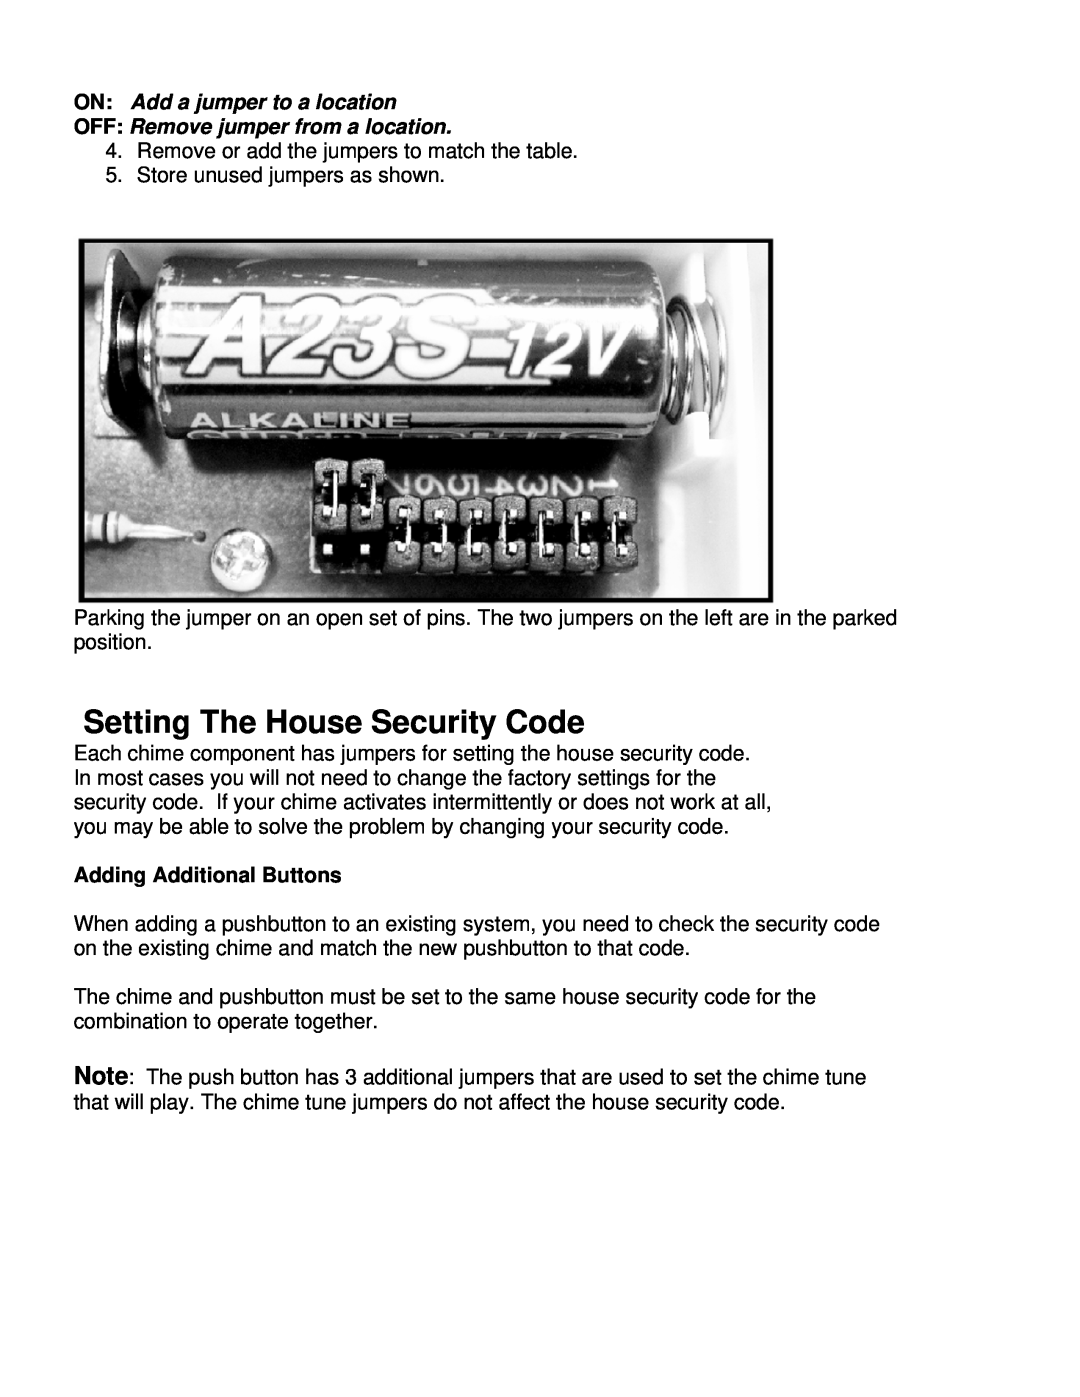 GE 19210, 19211 manual Setting The House Security Code, Adding Additional Buttons 